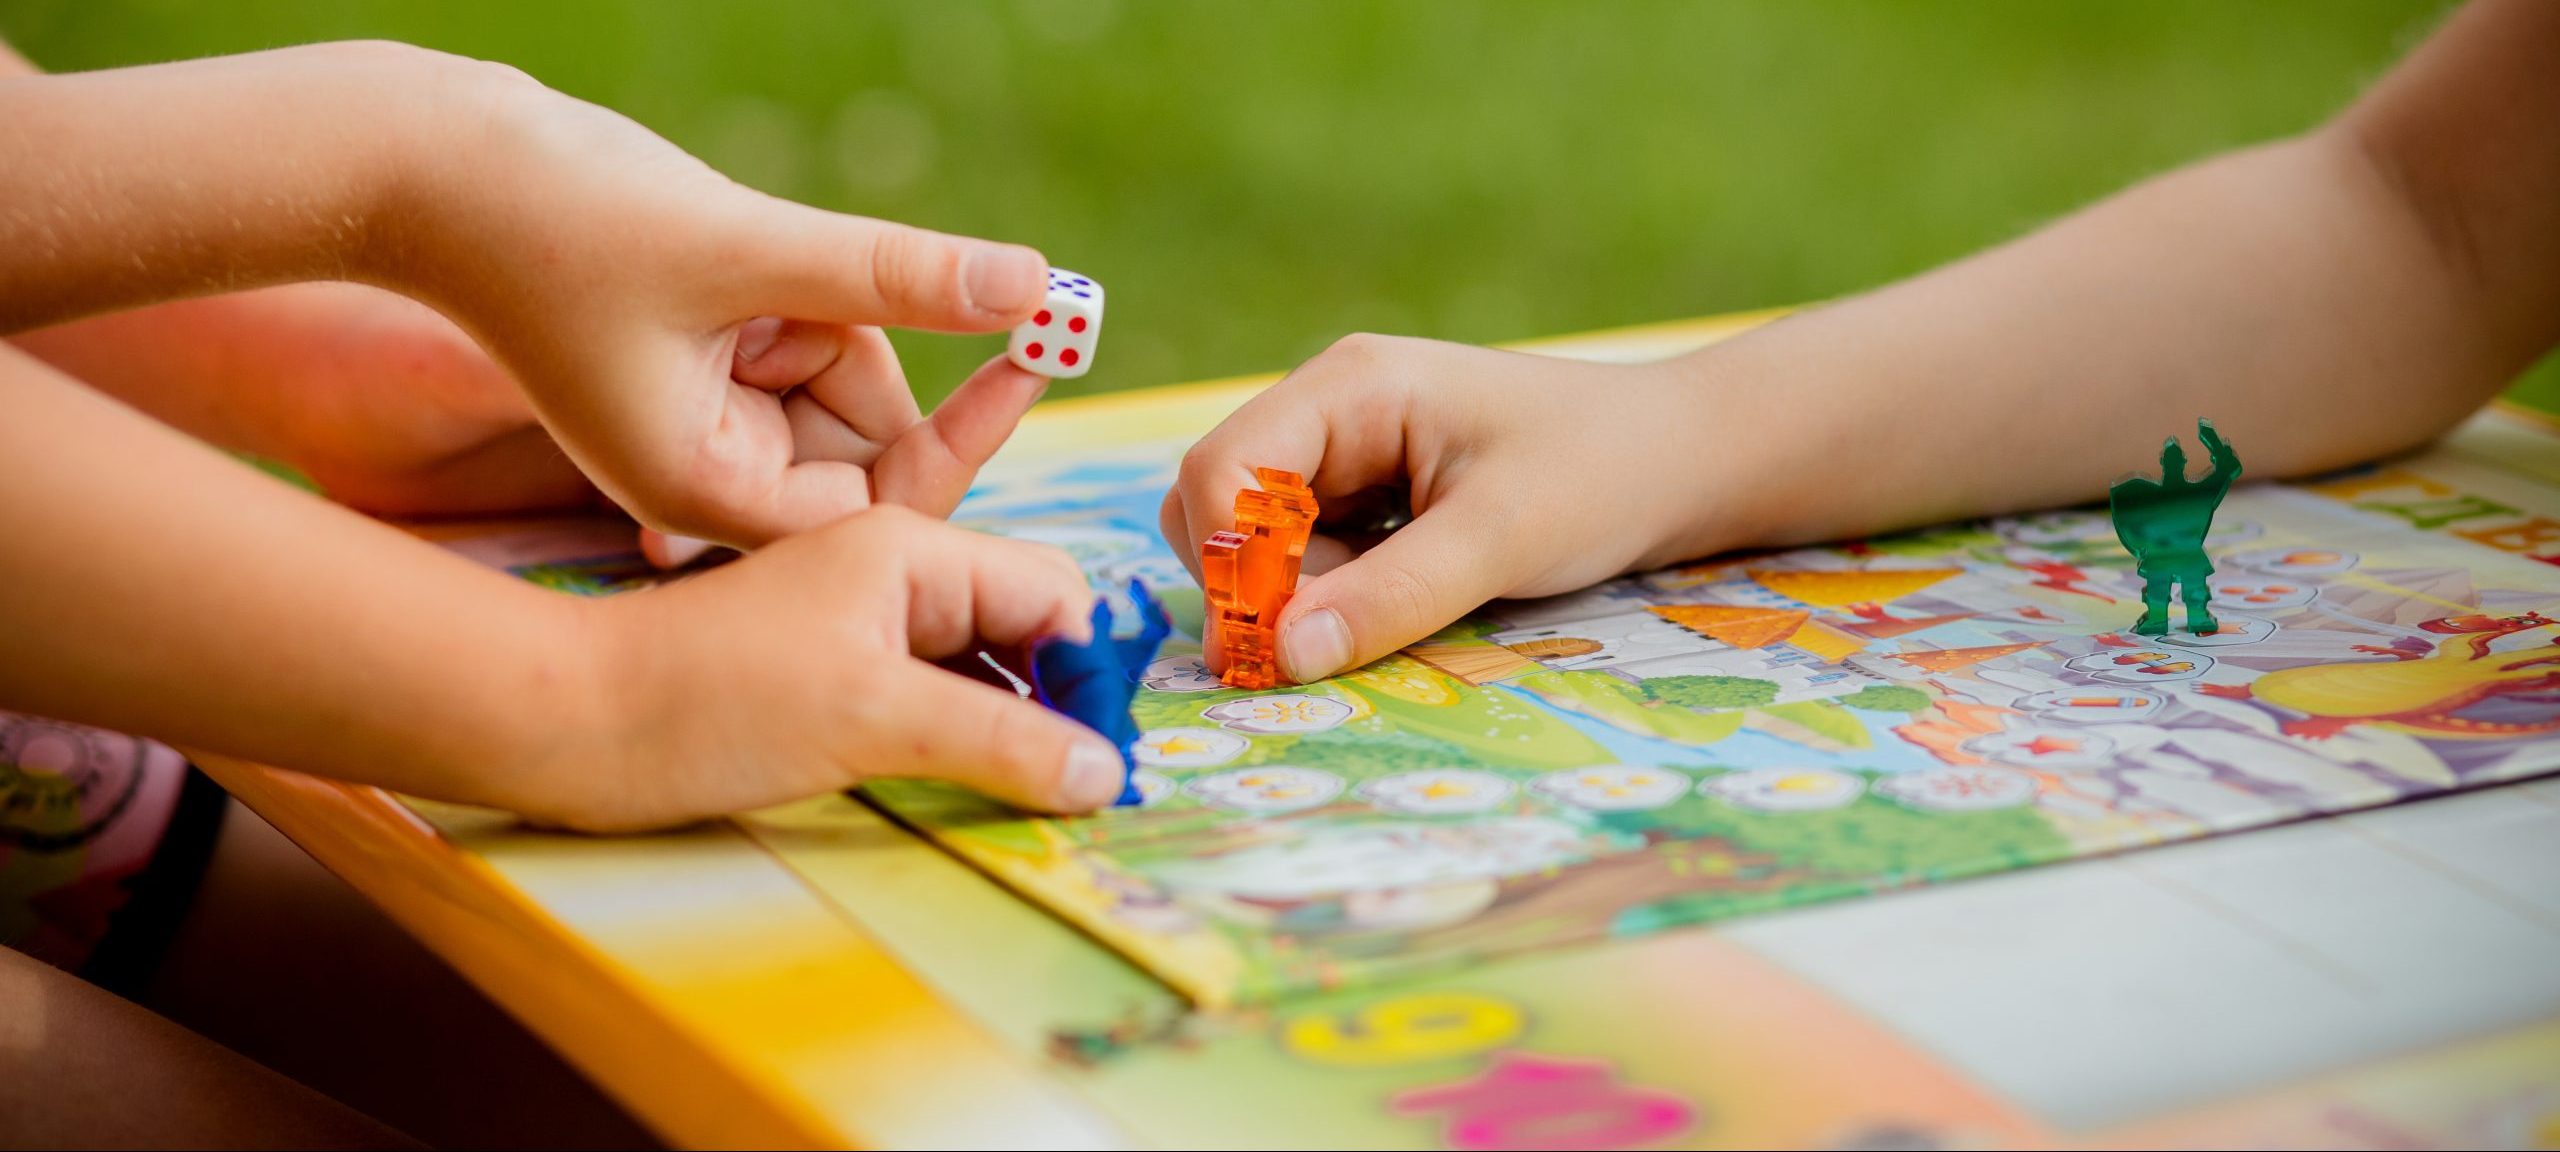 The Best Board Games For Kids 10 And Up | Reviews, Ratings, Comparisons